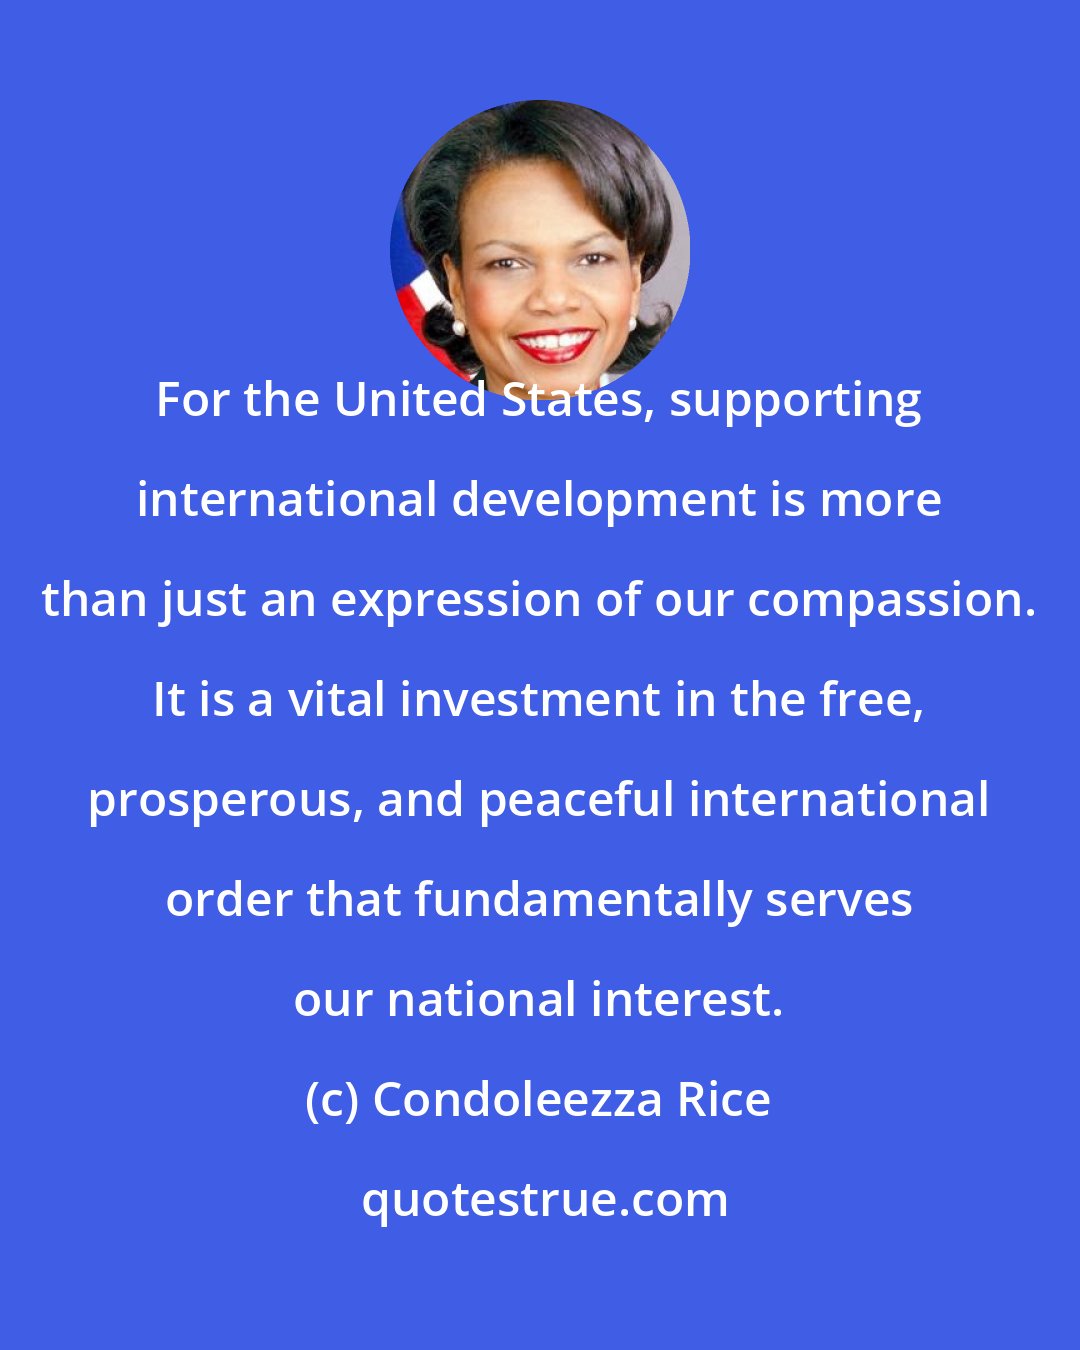 Condoleezza Rice: For the United States, supporting international development is more than just an expression of our compassion. It is a vital investment in the free, prosperous, and peaceful international order that fundamentally serves our national interest.